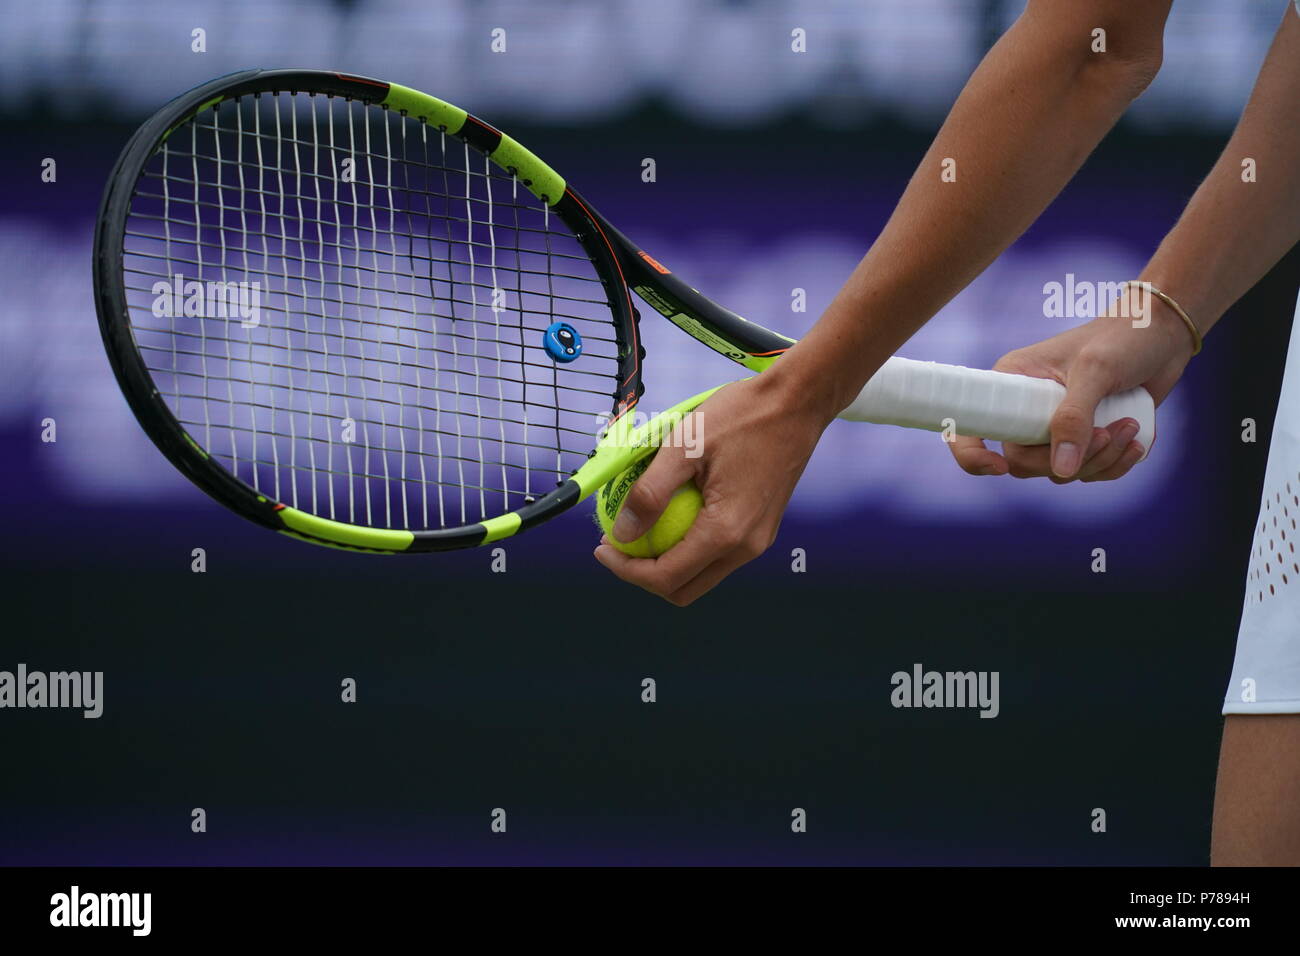 A general view of a Tennis Racket and Slazenger Ball on day three of the Wimbledon Championships at the All England Lawn Tennis and Croquet Club, Wimbledon. PRESS ASSOCIATION Photo. Picture date: Wednesday July 4, 2018. See PA story TENNIS Wimbledon. Photo credit should read: John Walton/PA Wire. Stock Photo